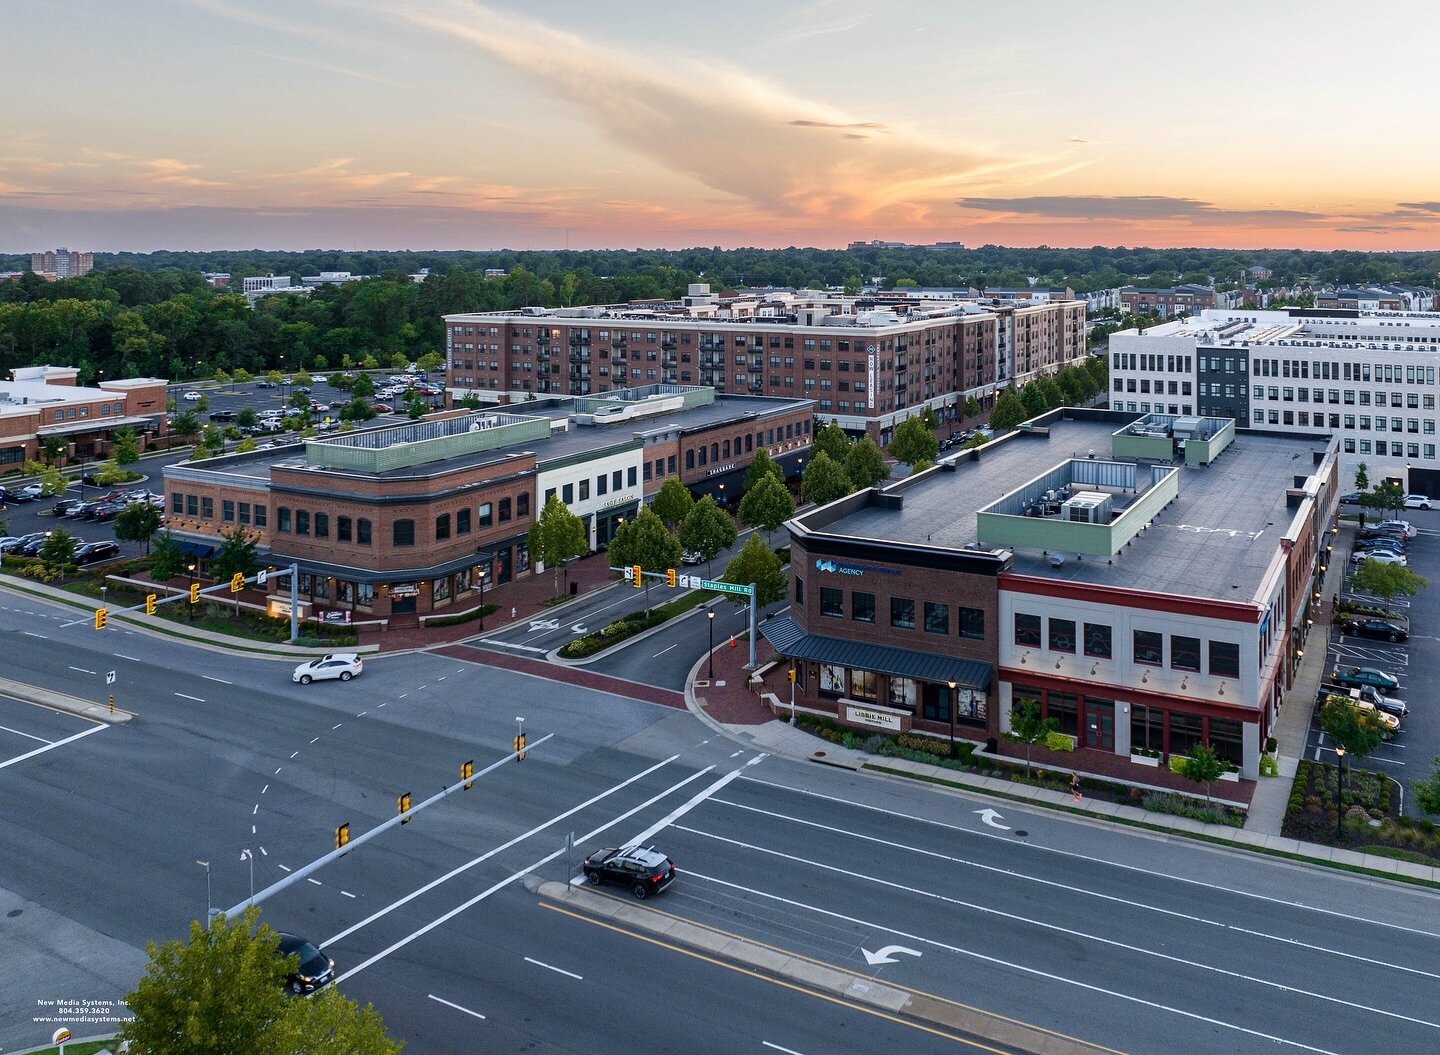 Like a good neighbor&hellip; State Farm is HERE! 🏡🚗🐾 We are pleased to share that the Percy Barnett State Farm Insurance Agency has leased retail suite 160 of the Tanner Row building, next to @airrosti and behind @craftedrva.

We believe this new 